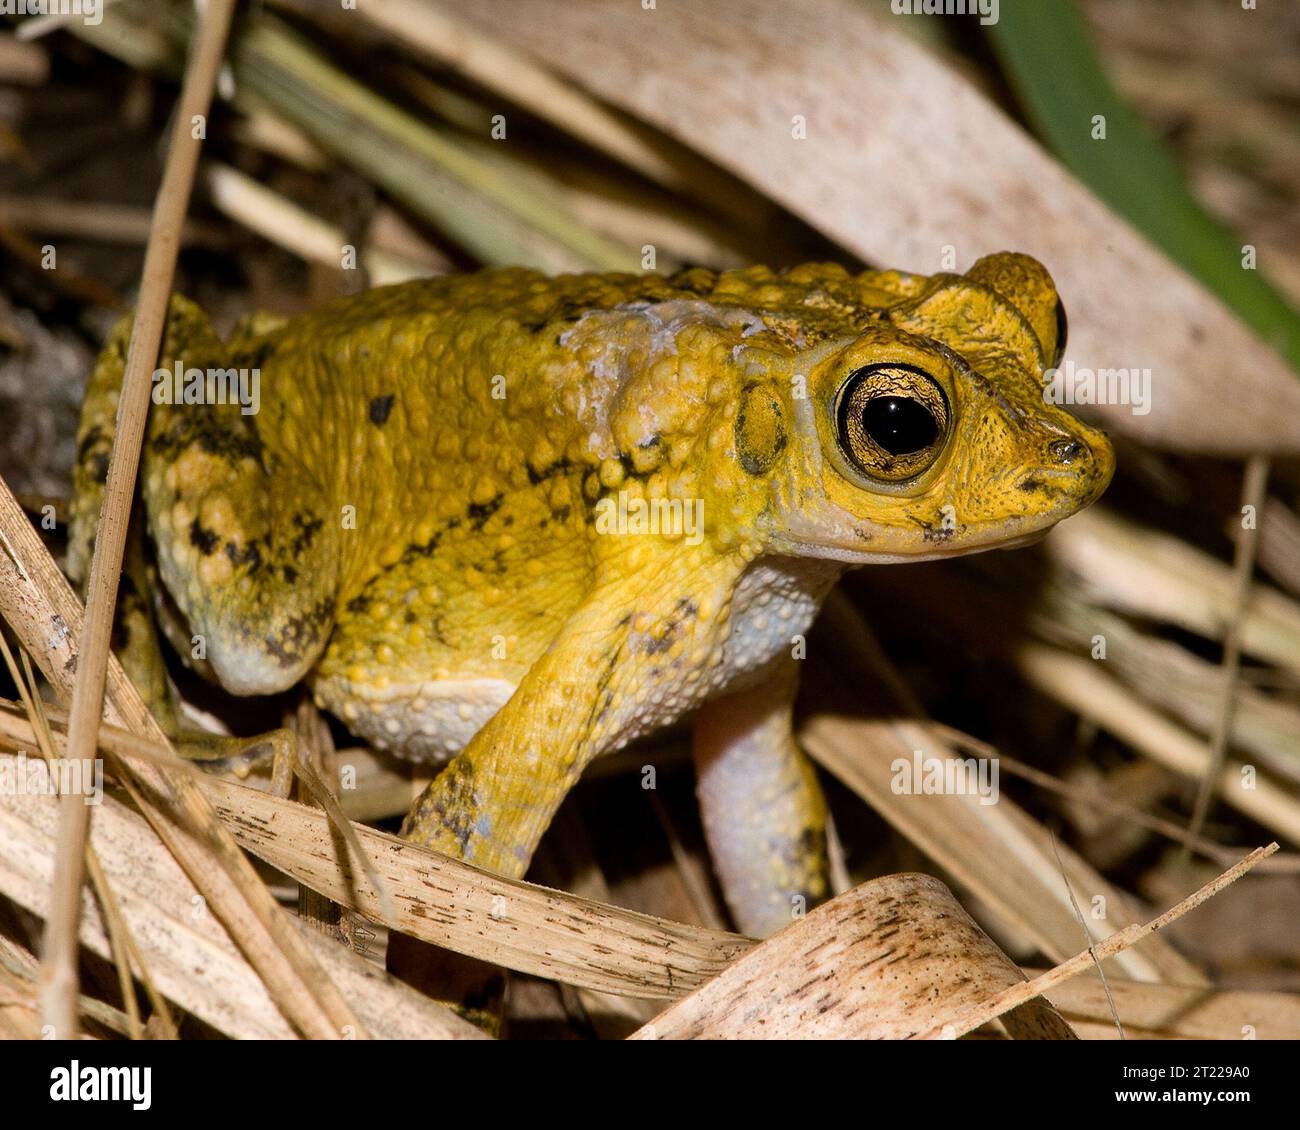 Crested toad sitting on dried grass. Subjects: Amphibians; Threatened species. Location: Puerto Rico. Fish and Wildlife Service Site: CARIBBEAN ISLANDS REFUGES. Stock Photo